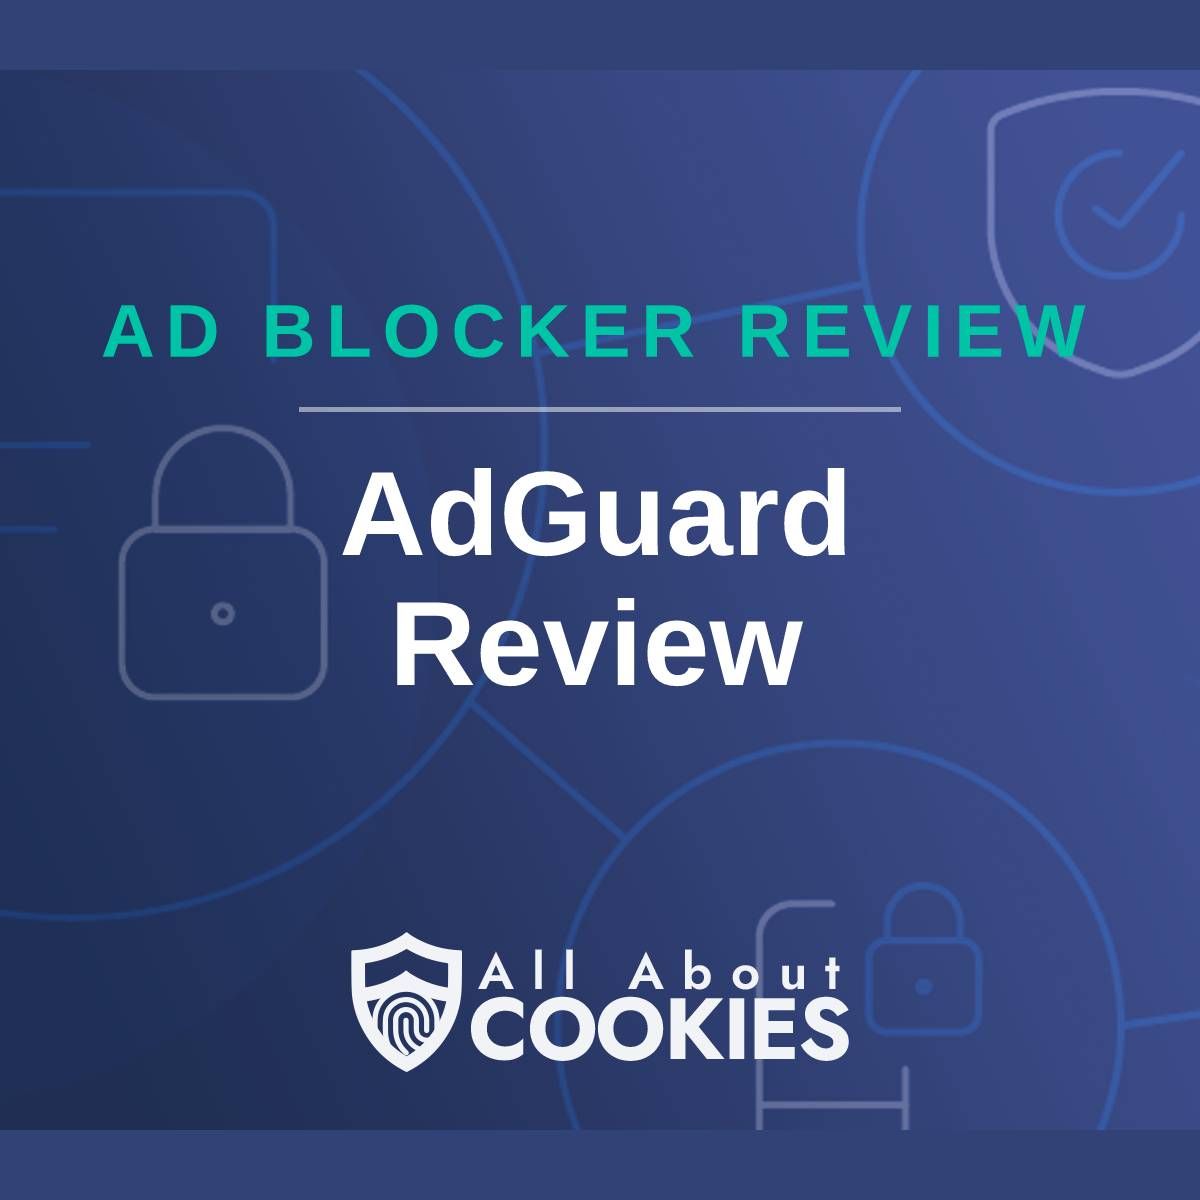 A blue background with images of locks and shields with the text &quot;Ad Blocker Review AdGuard Review&quot; and the All About Cookies logo. 